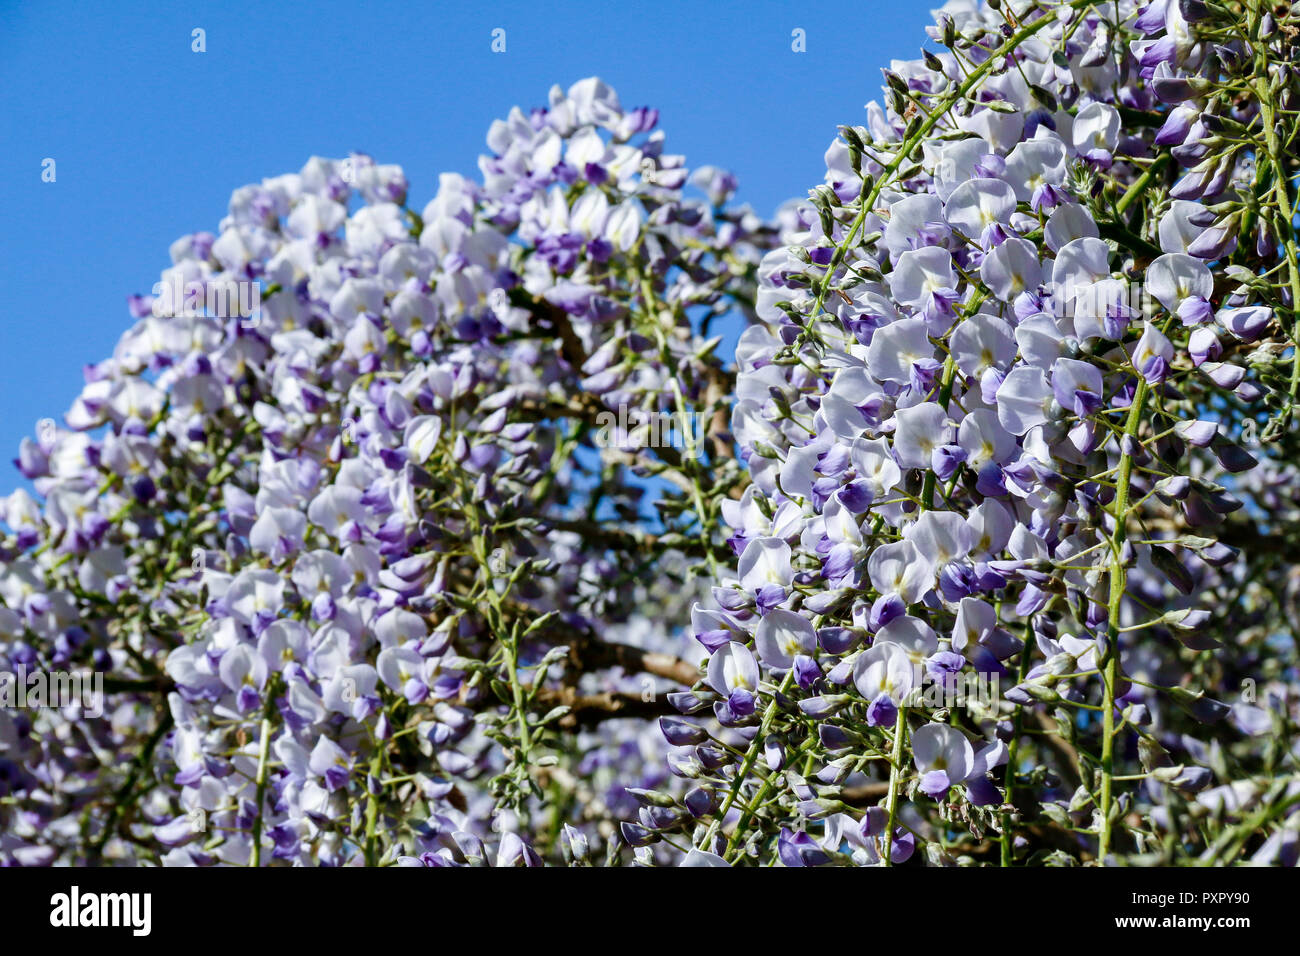 Close up of purple and white flowers of Wisteria Sinensis (Chinese Wisteria) Stock Photo